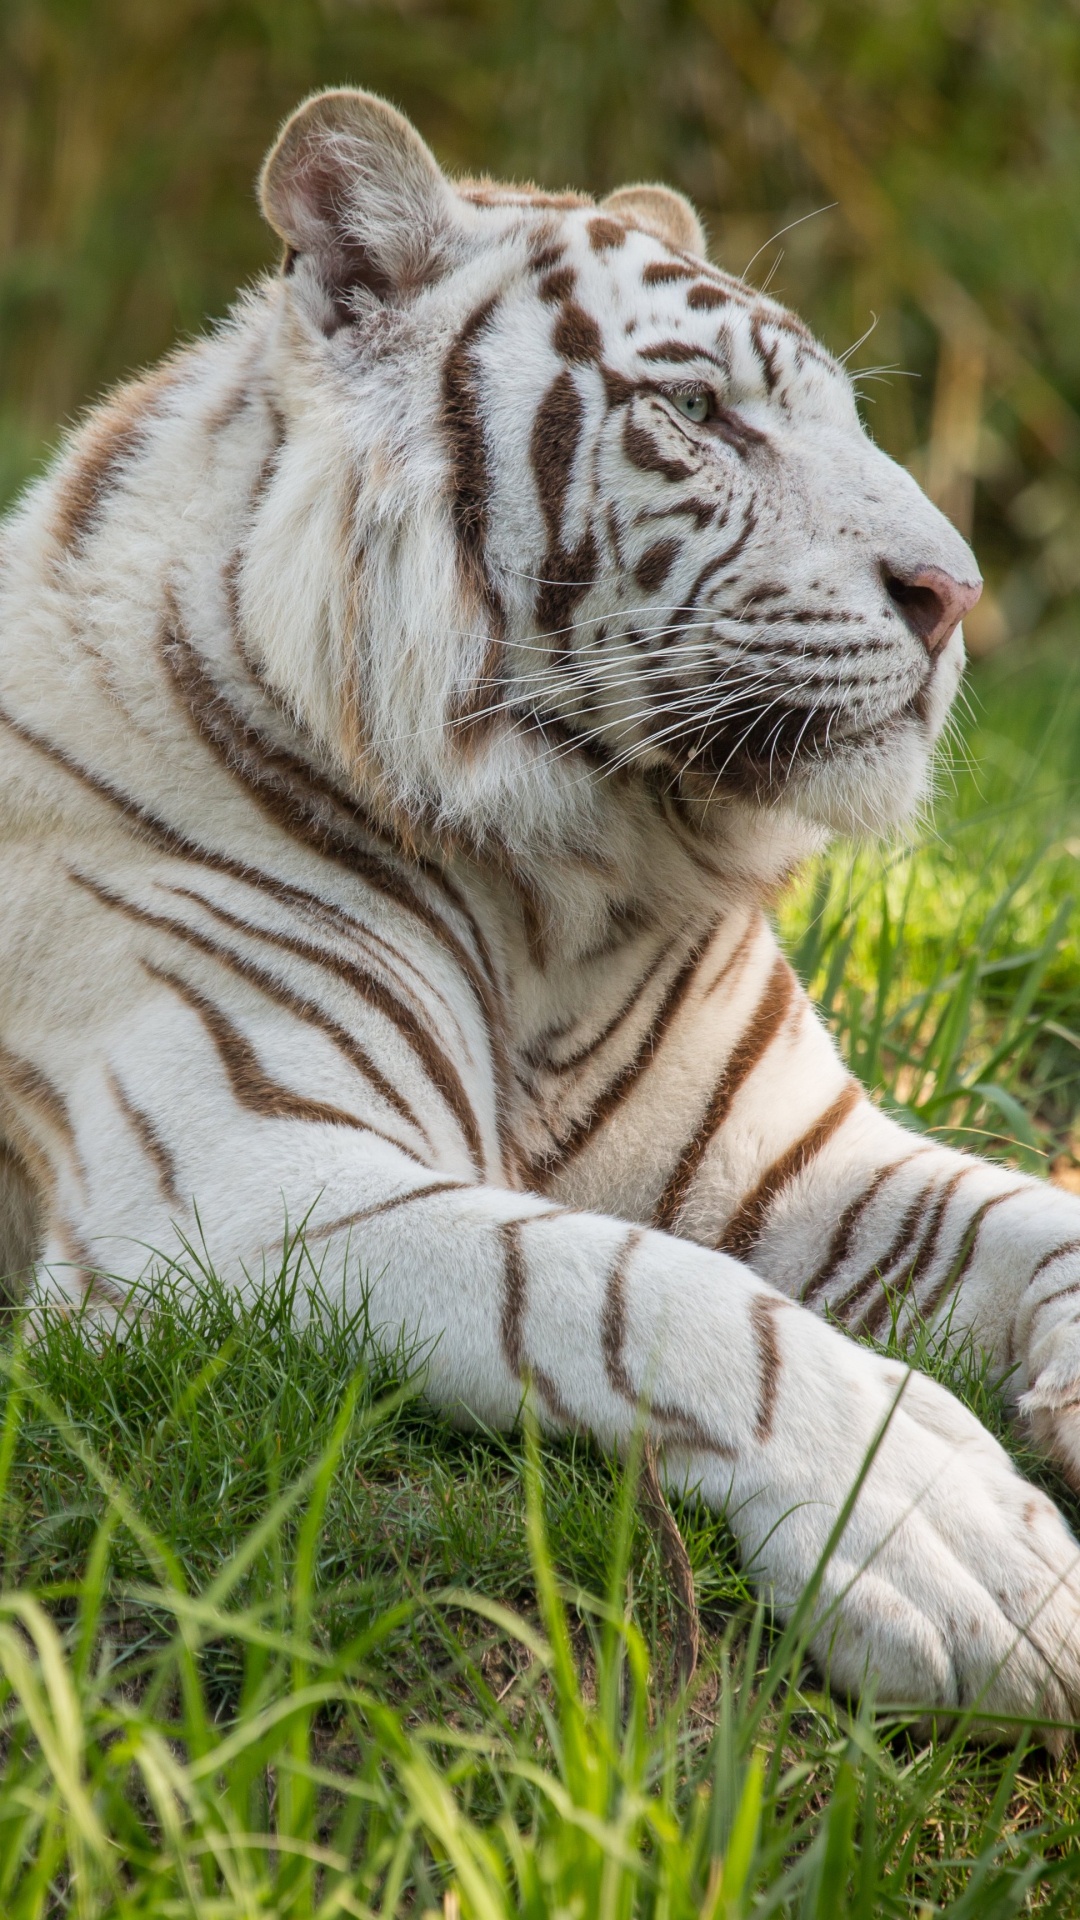 White and Black Tiger Lying on Green Grass During Daytime. Wallpaper in 1080x1920 Resolution